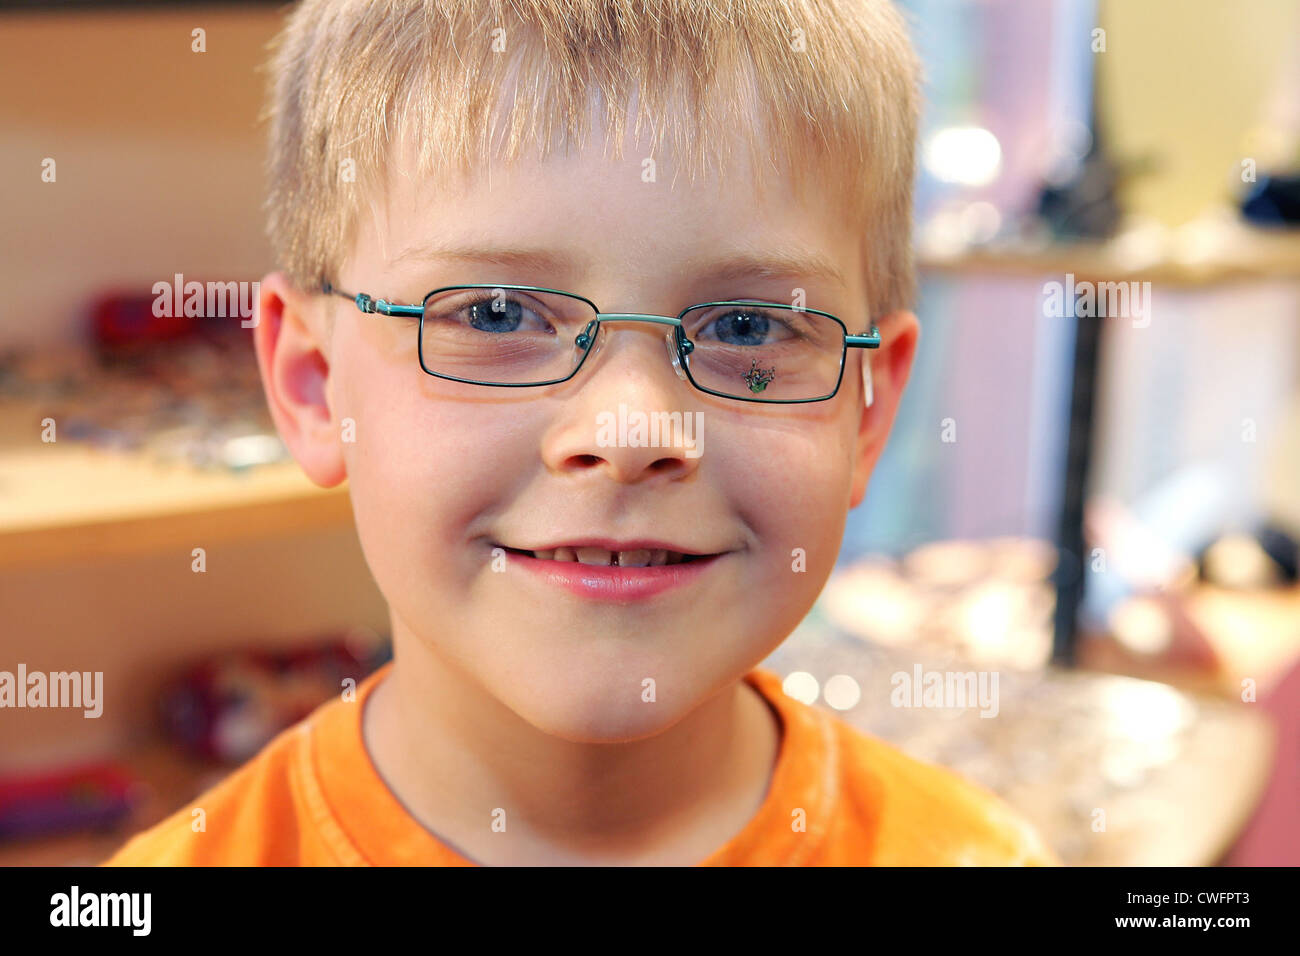 Kid with glasses Stock Photo